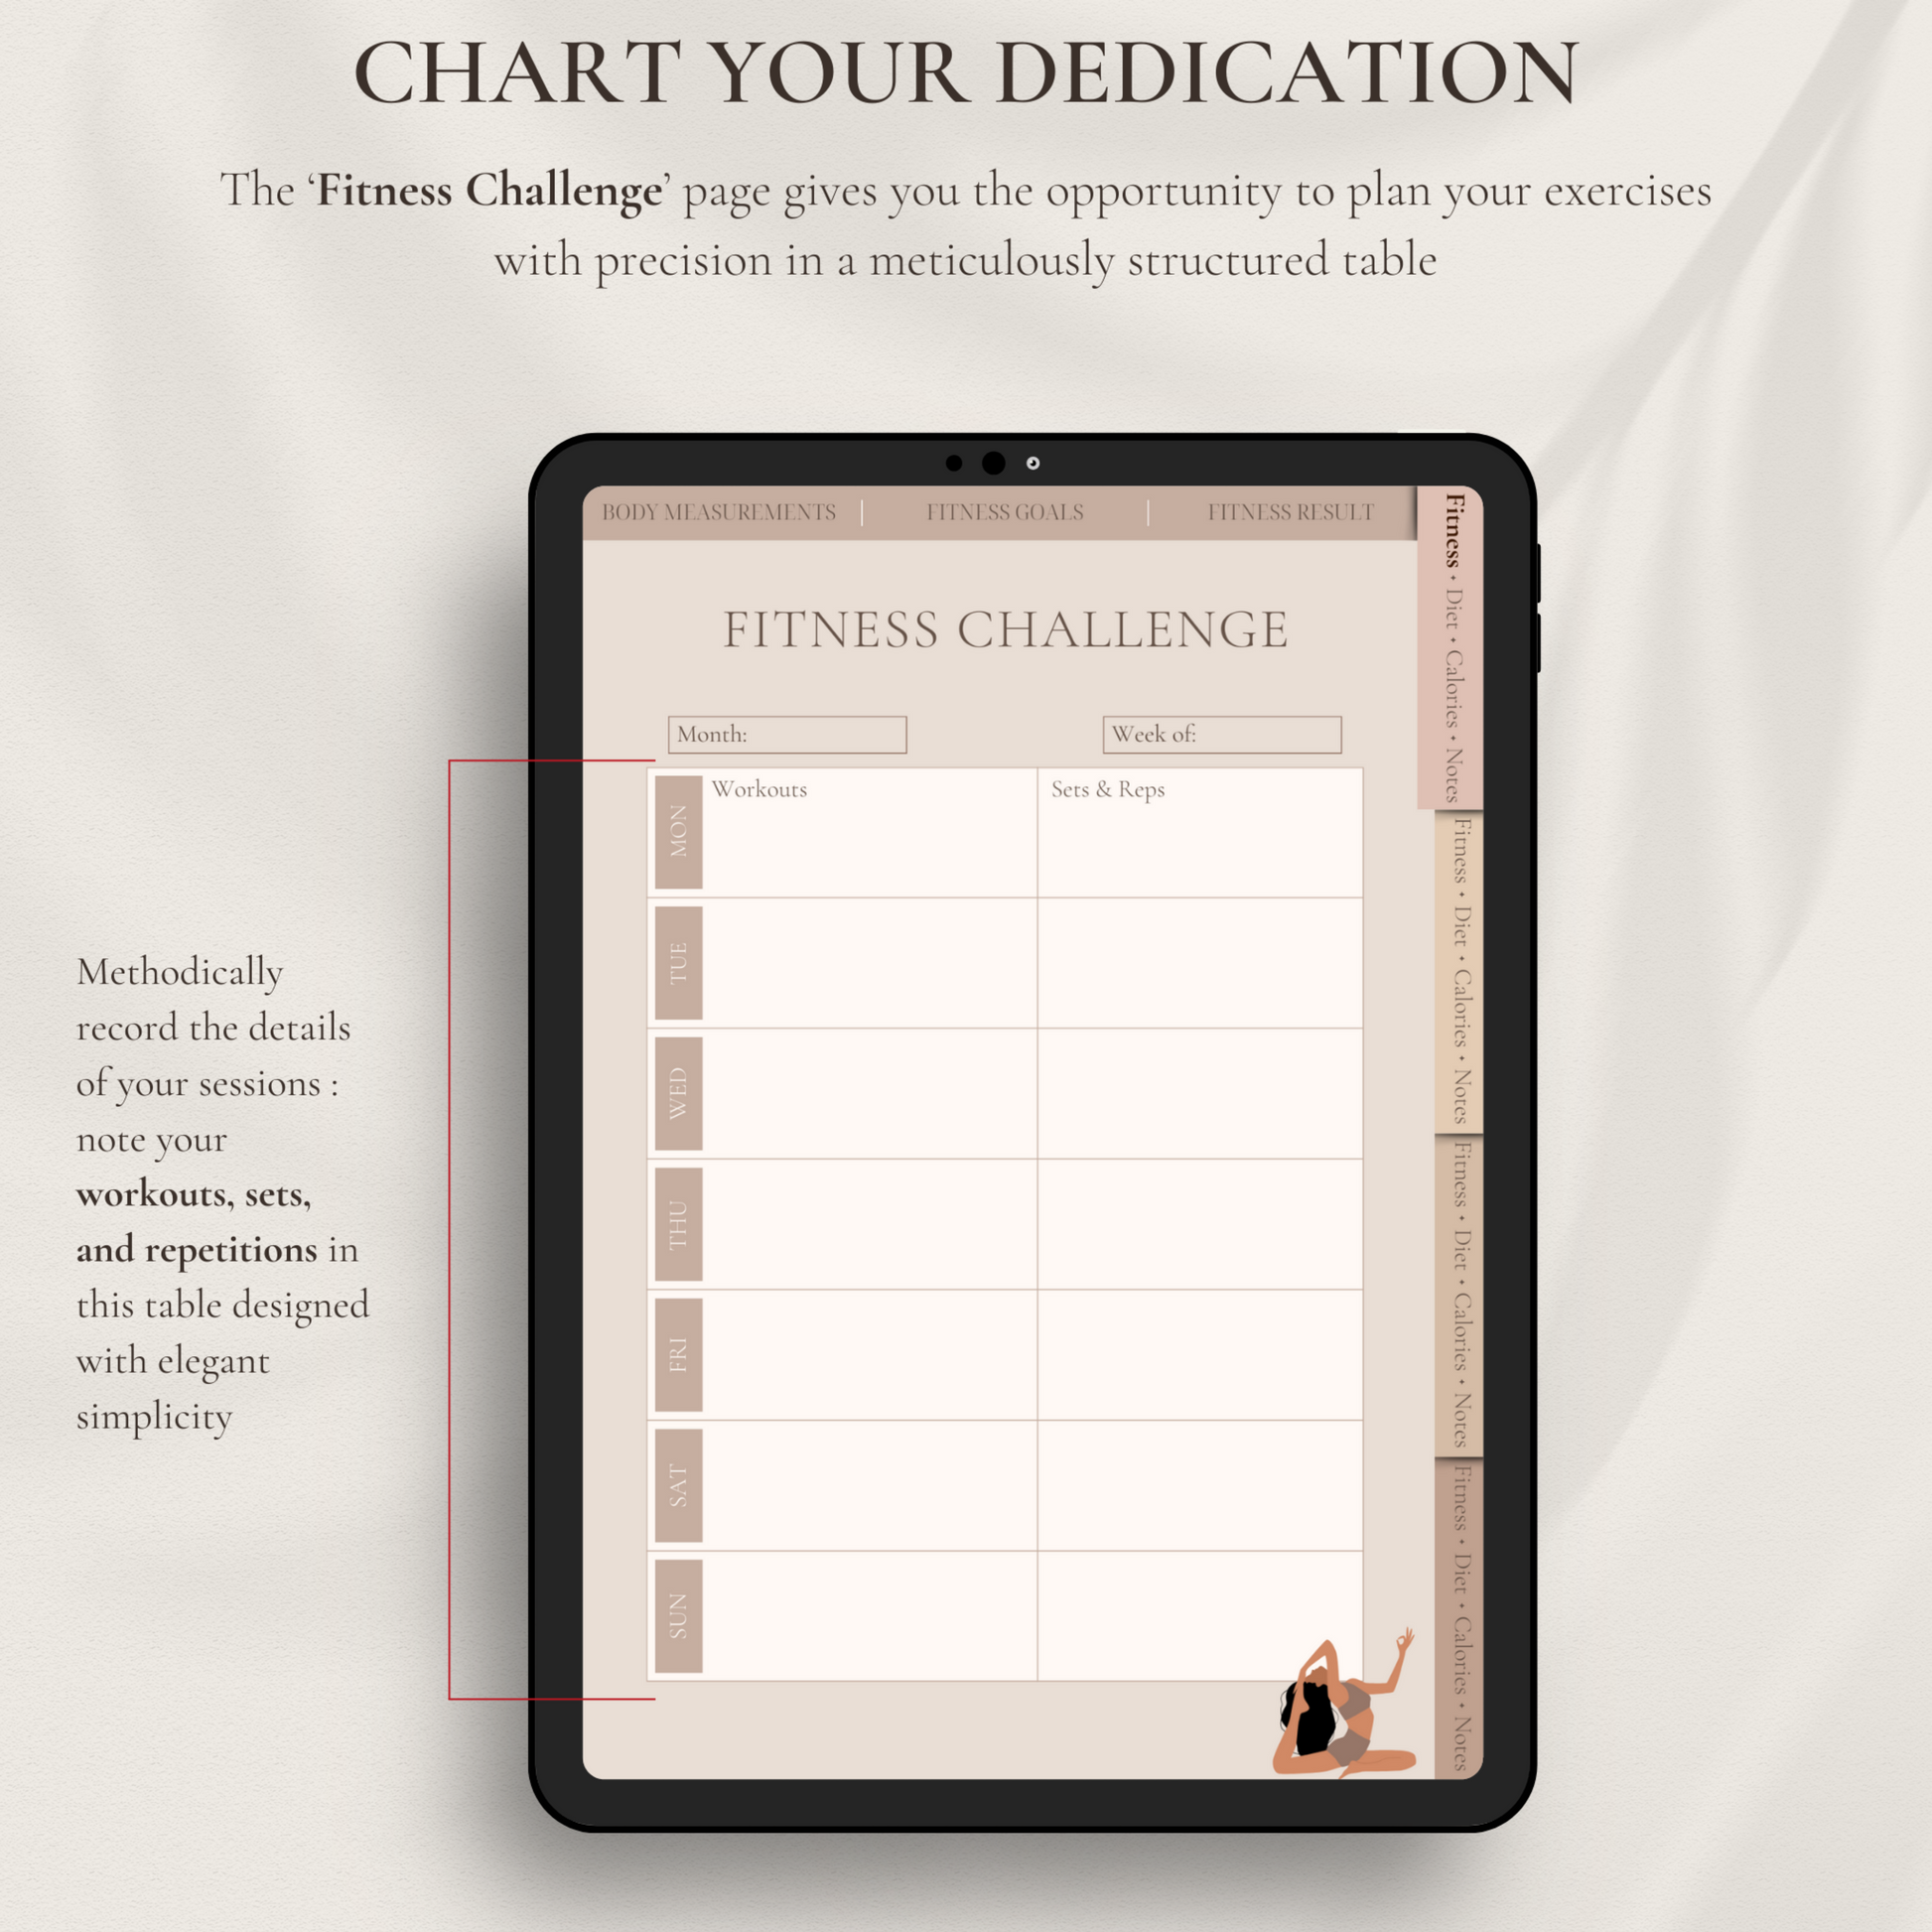 The 'Fitness Challenge' page gives you the opportunity to plan your exercises with precision in meticulously structured table